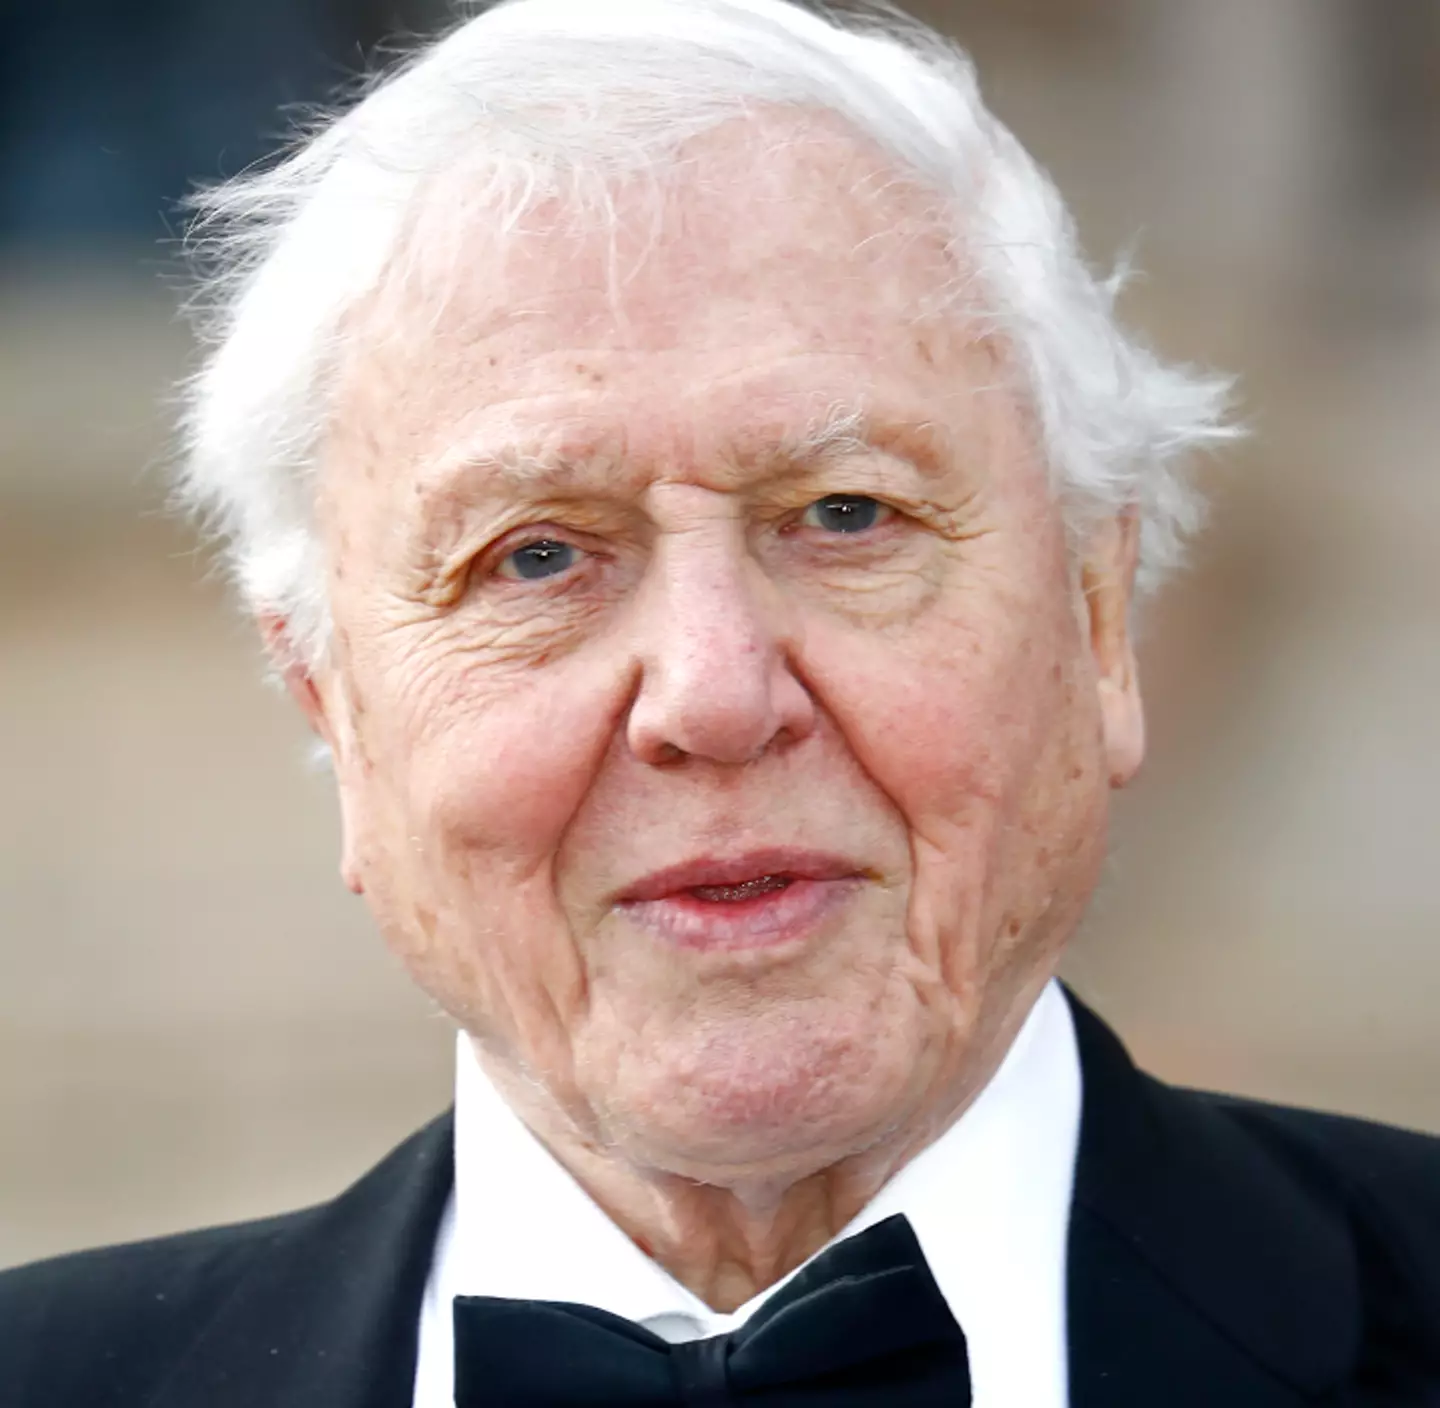 David Attenborough presented the first Planet Earth in 2006.